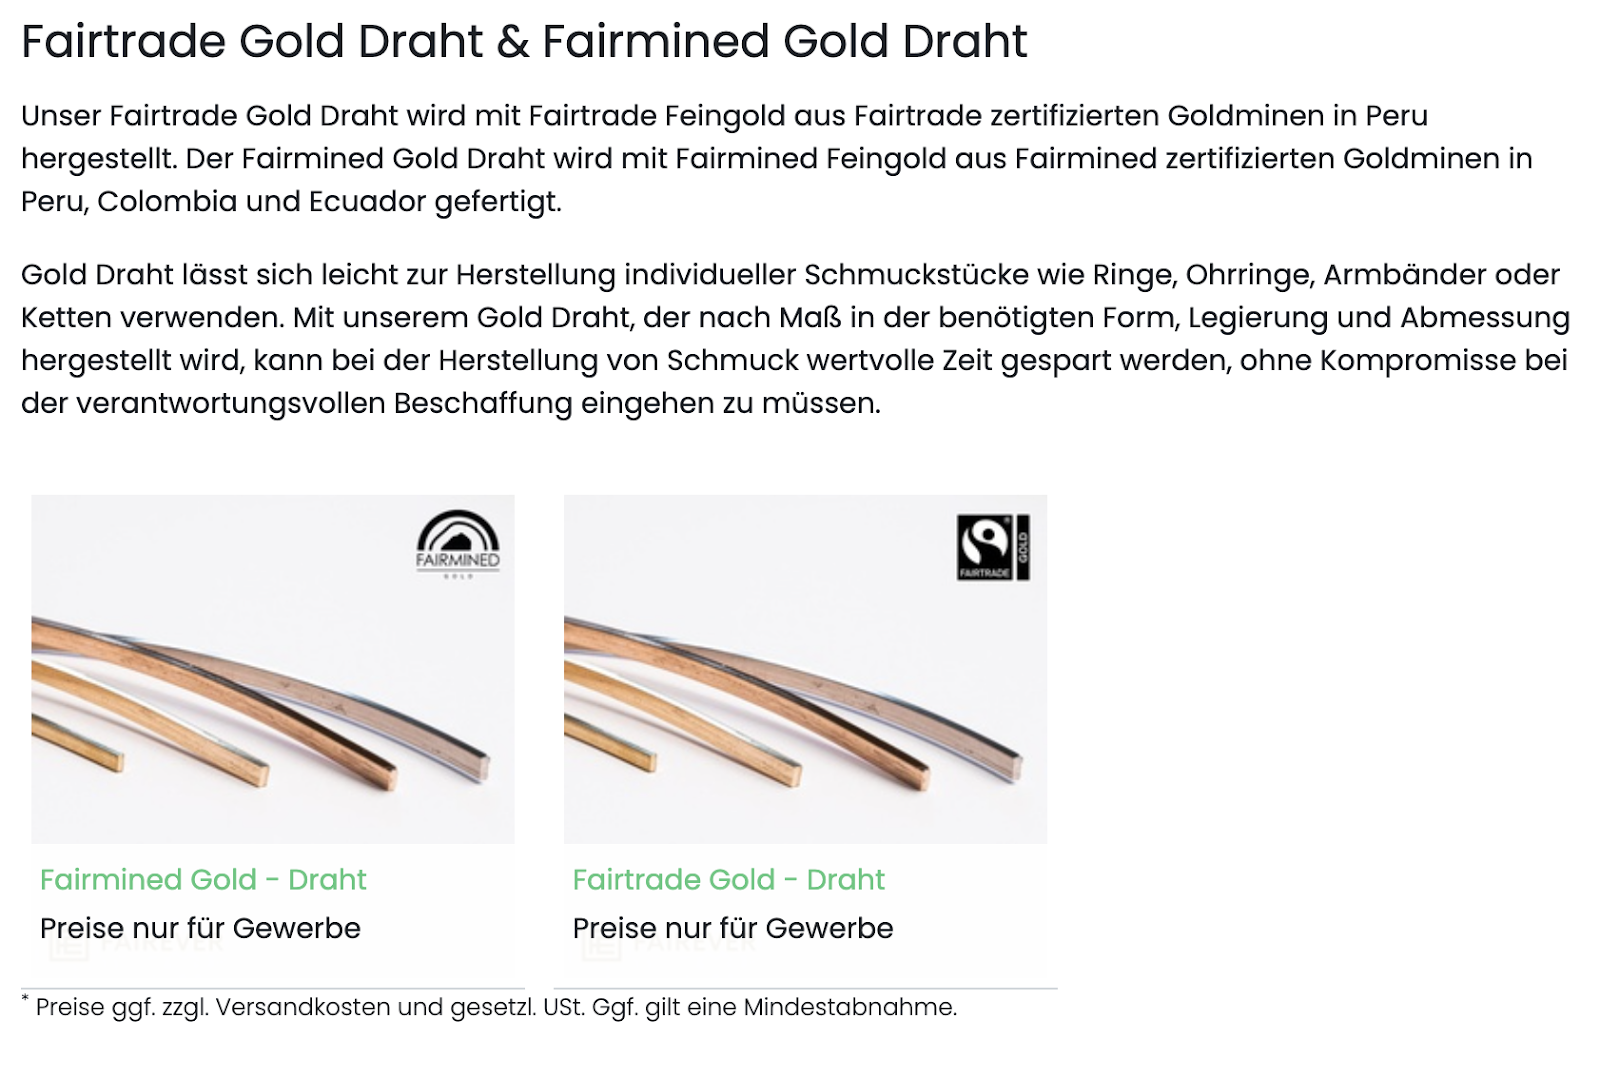 Fairever Gairtrade Gold Dhaht and Fairmined Gold Draht